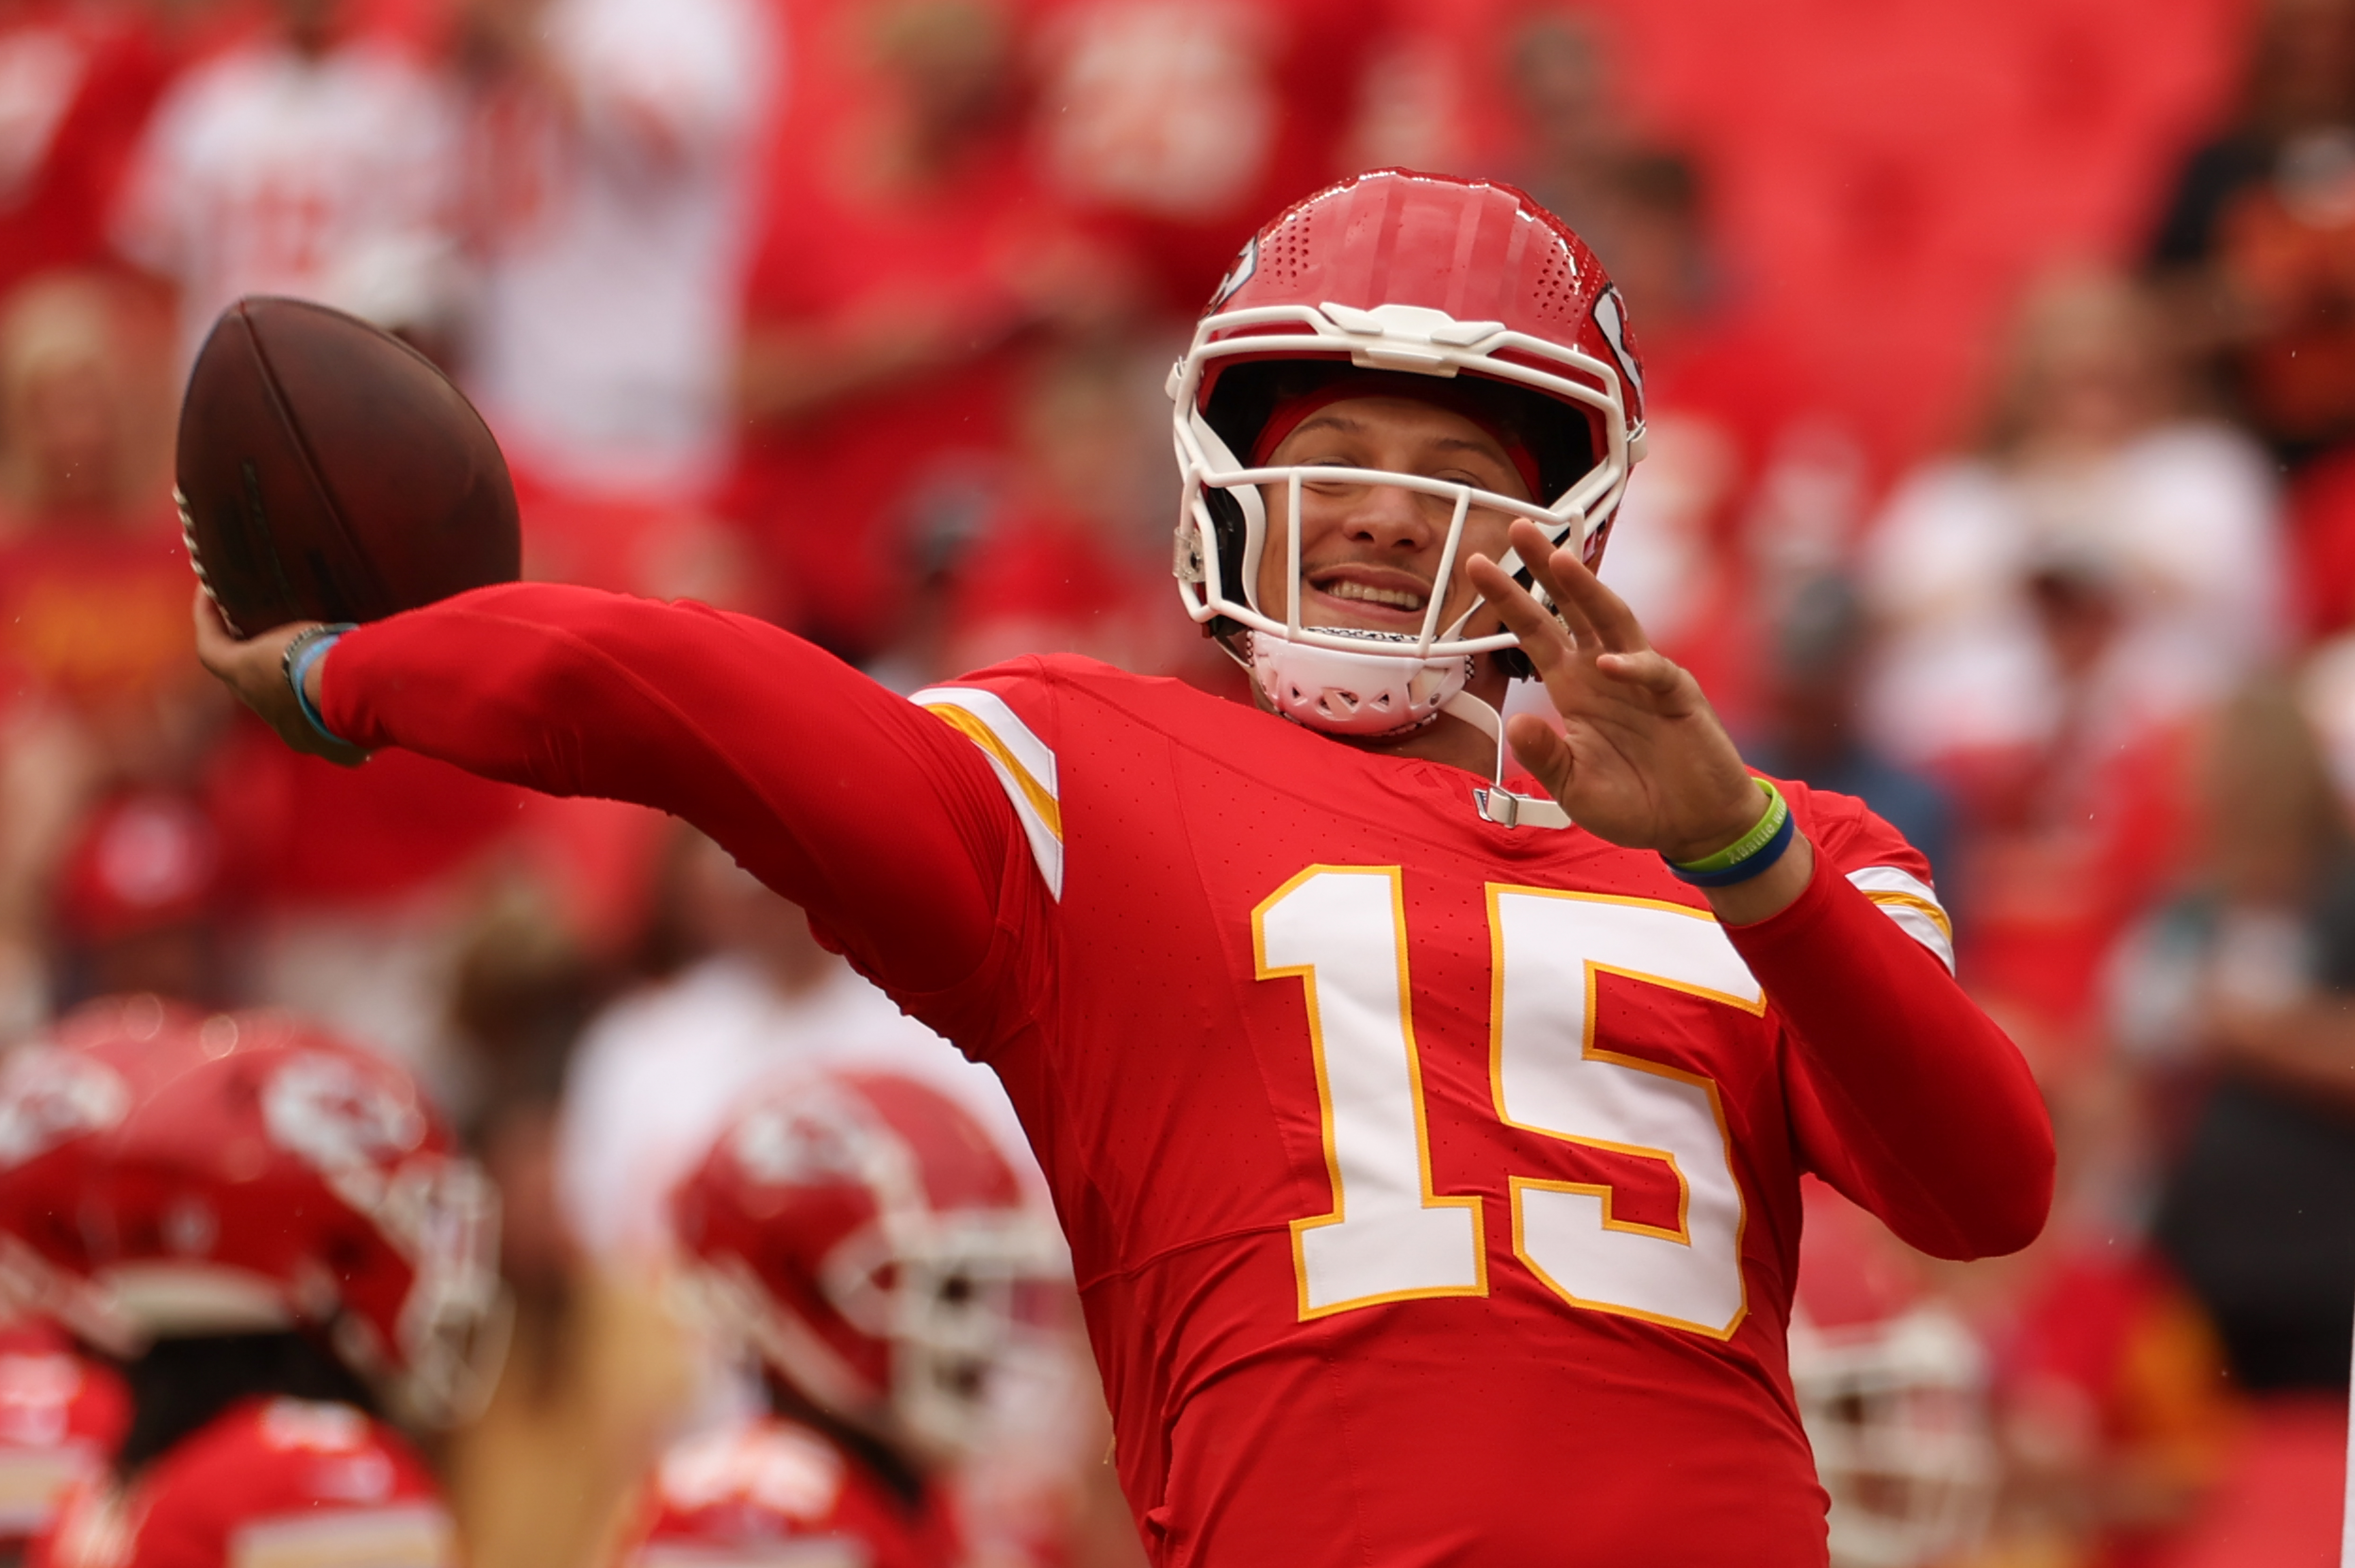 NFL: AUG 26 Browns at Chiefs